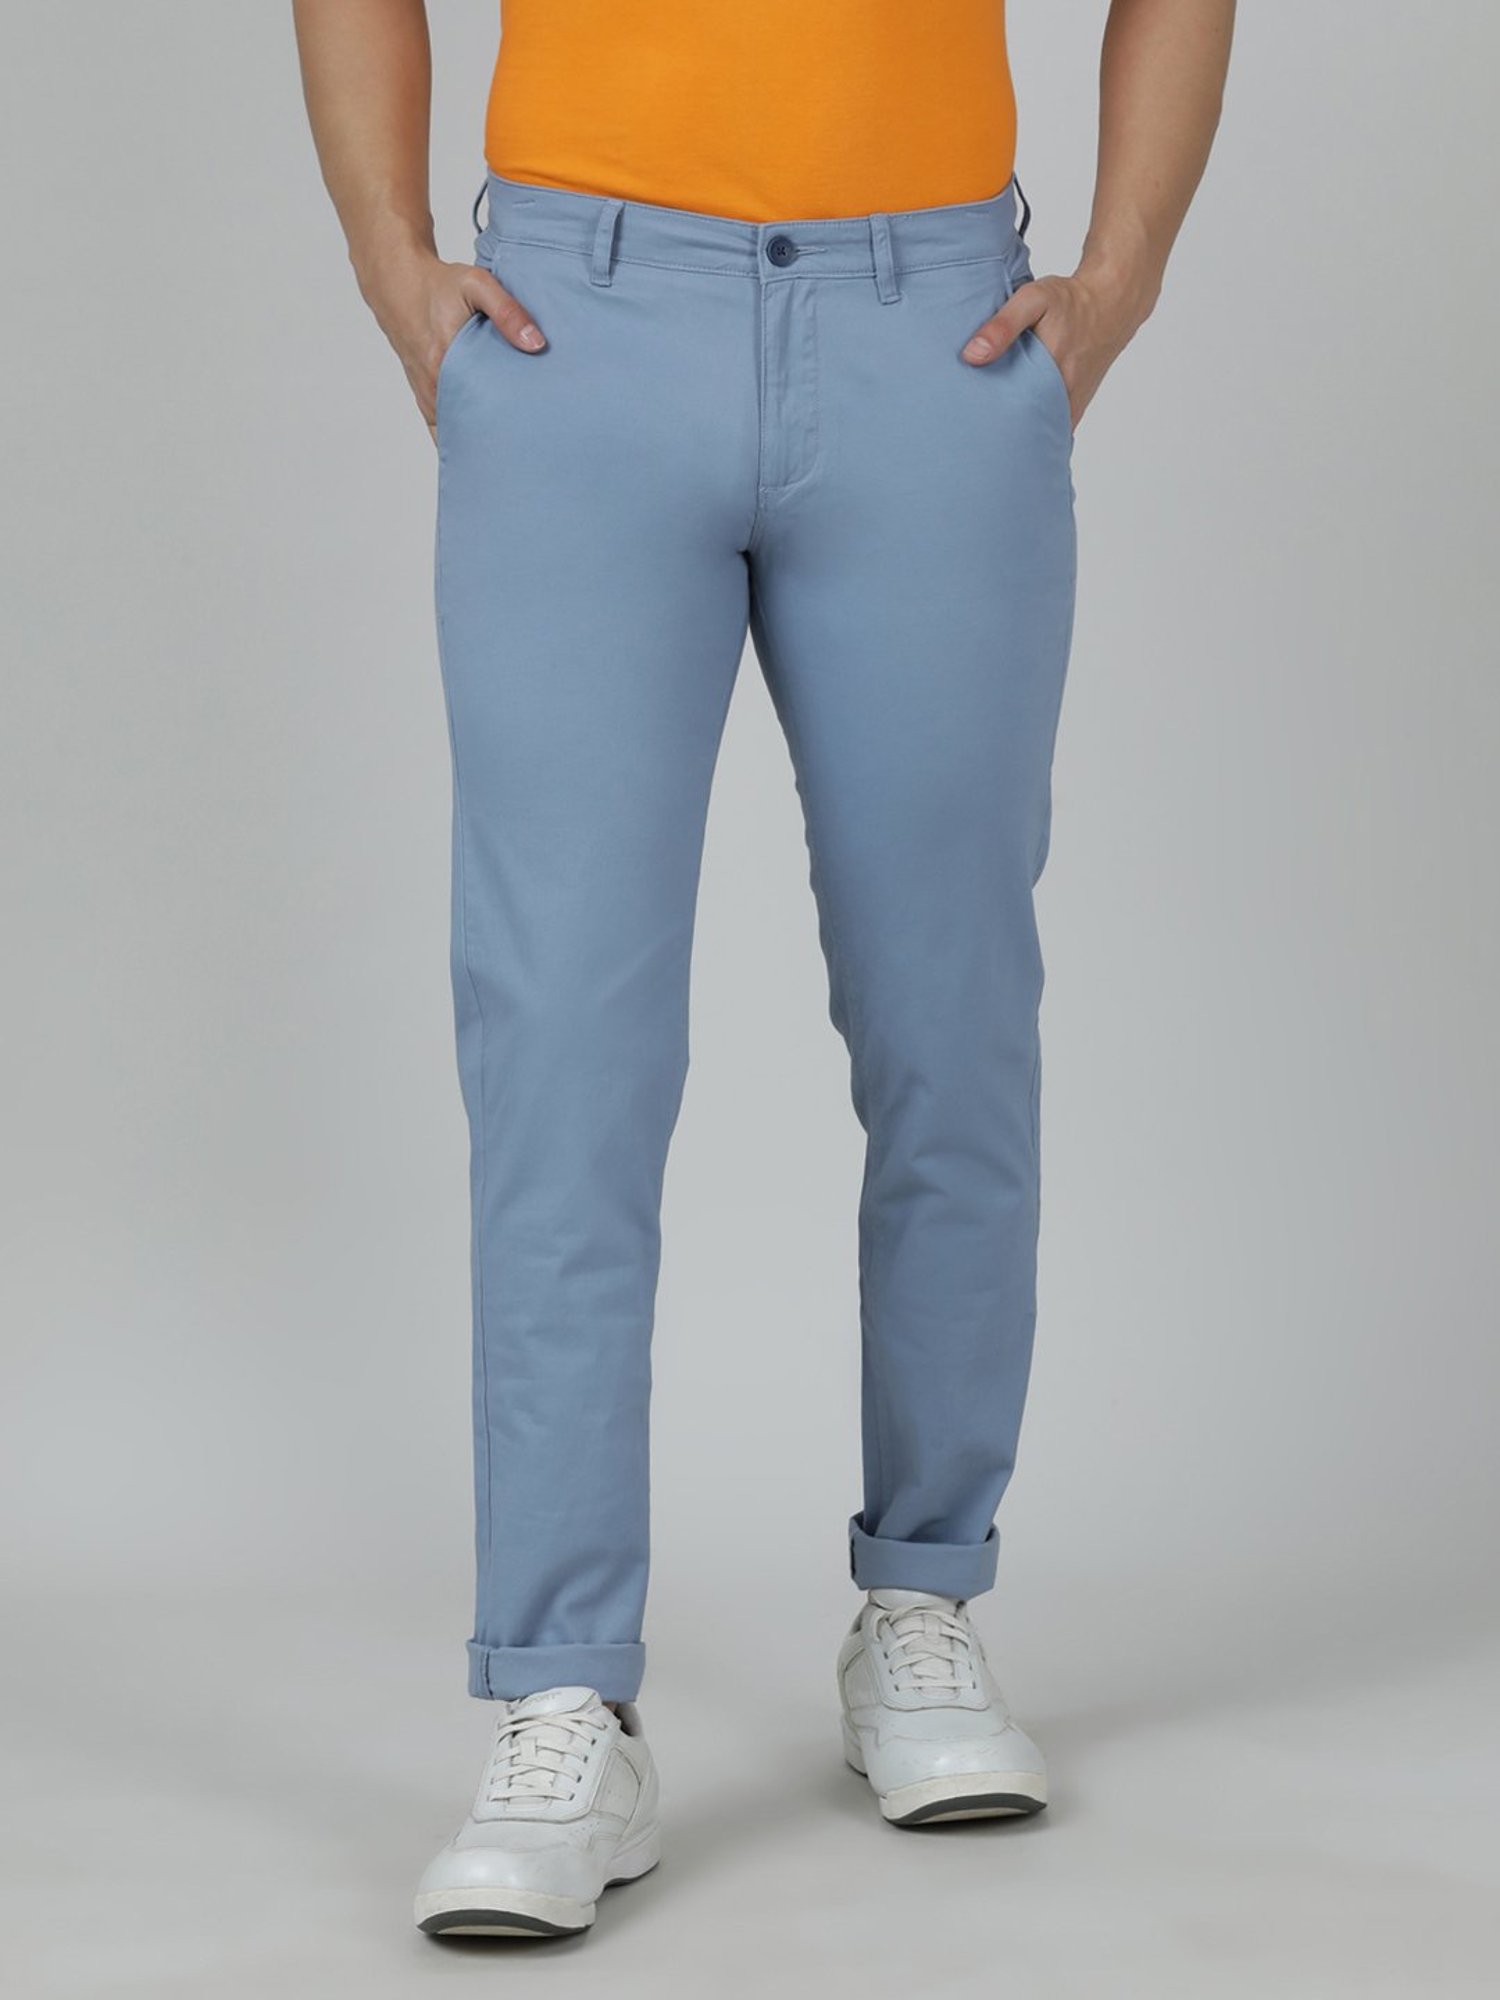 Mens The Modern Stretch Slim Trouser in Light Blue Size 30 by Fashion Nova  | Light blue suit, Slim trousers, Men fashion casual outfits